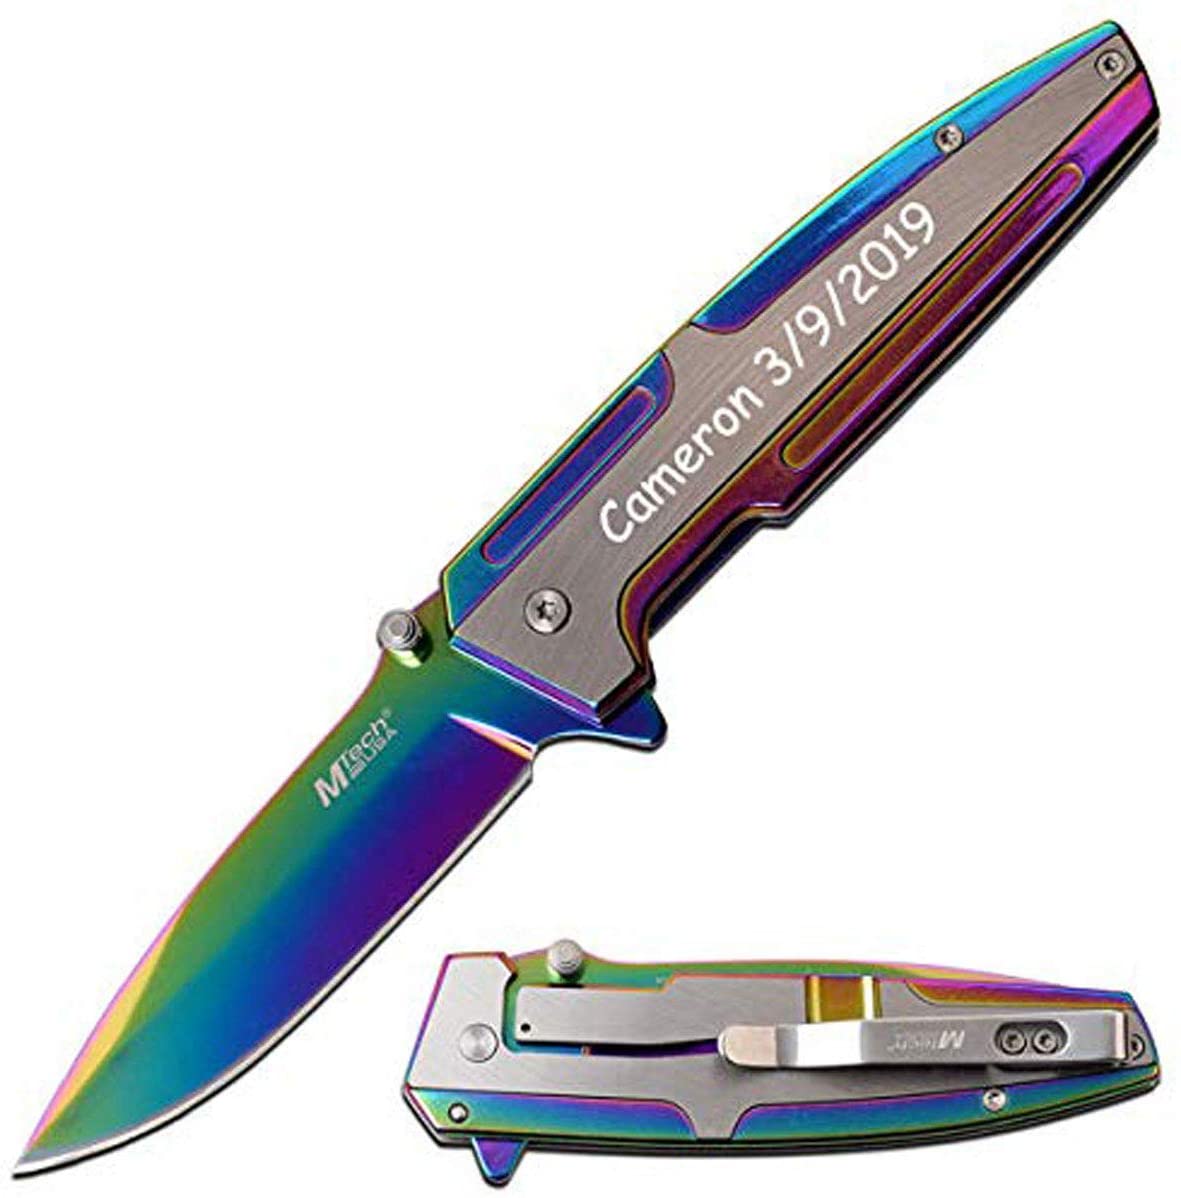 GIFTS INFINITY Pocket Folding Knife, Sharp Stainless Steel Rainbow 4.75" Tinite Coated Two Tons Stainless Steel Handle